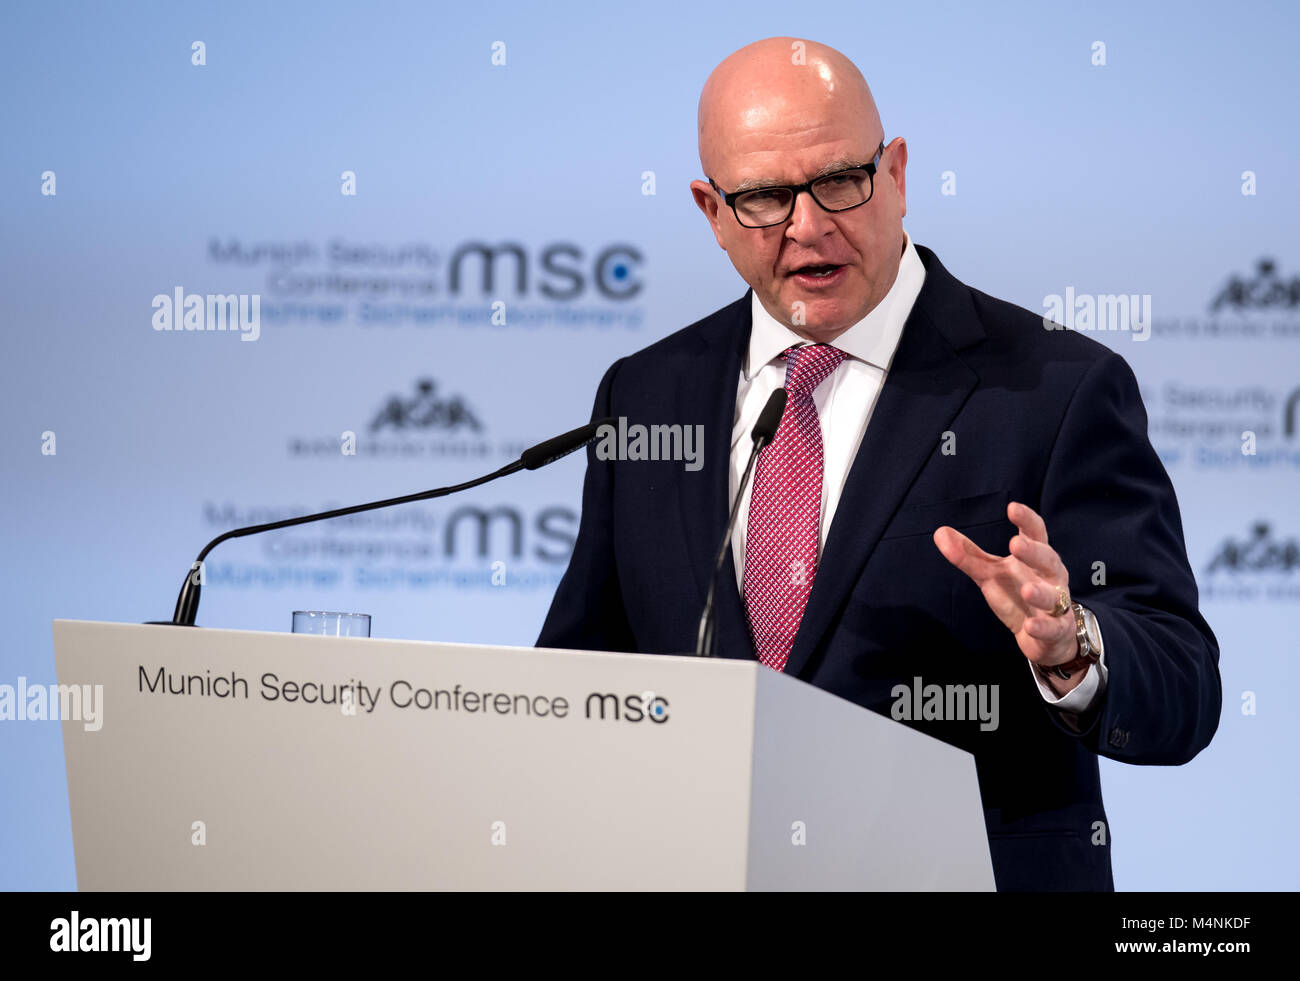 Raymond McMaster, National Security Advisor of the United States of America, delivers a speech at the 54th Munich Security Conference in Munich, Germany, 16 February 2018. More than 500 guests among those head of states and head of governments, are expected to attend the three day conference. Photo: Sven Hoppe/dpa Stock Photo